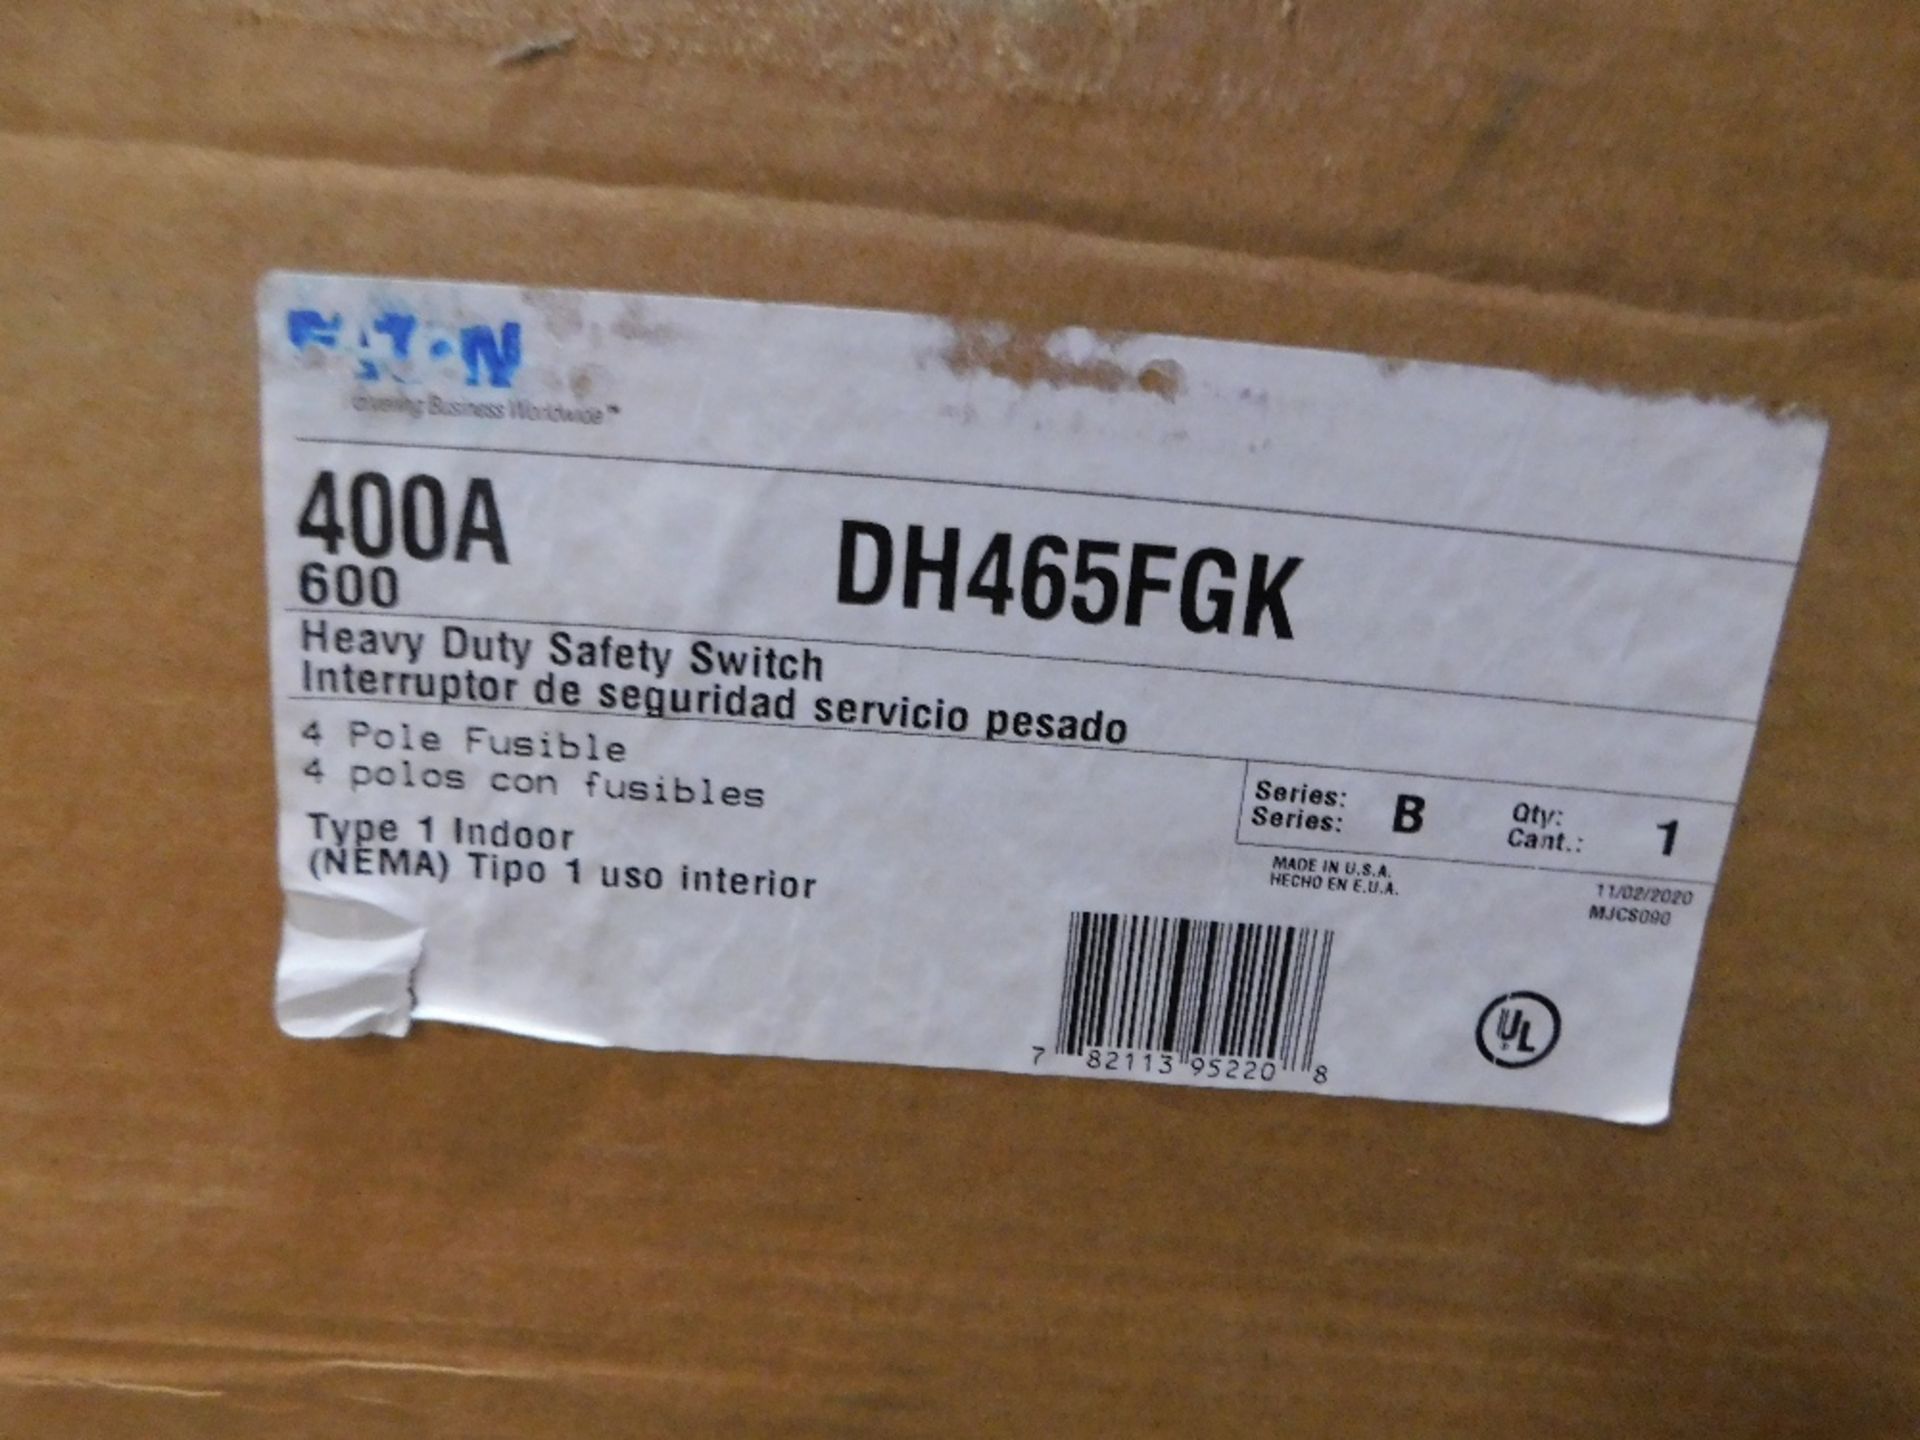 1x Eaton DH465FGK Safety Switches DH 4P 400A 600V 50 60Hz 3Ph Fusible 4Wire NEMA 1 Indoor